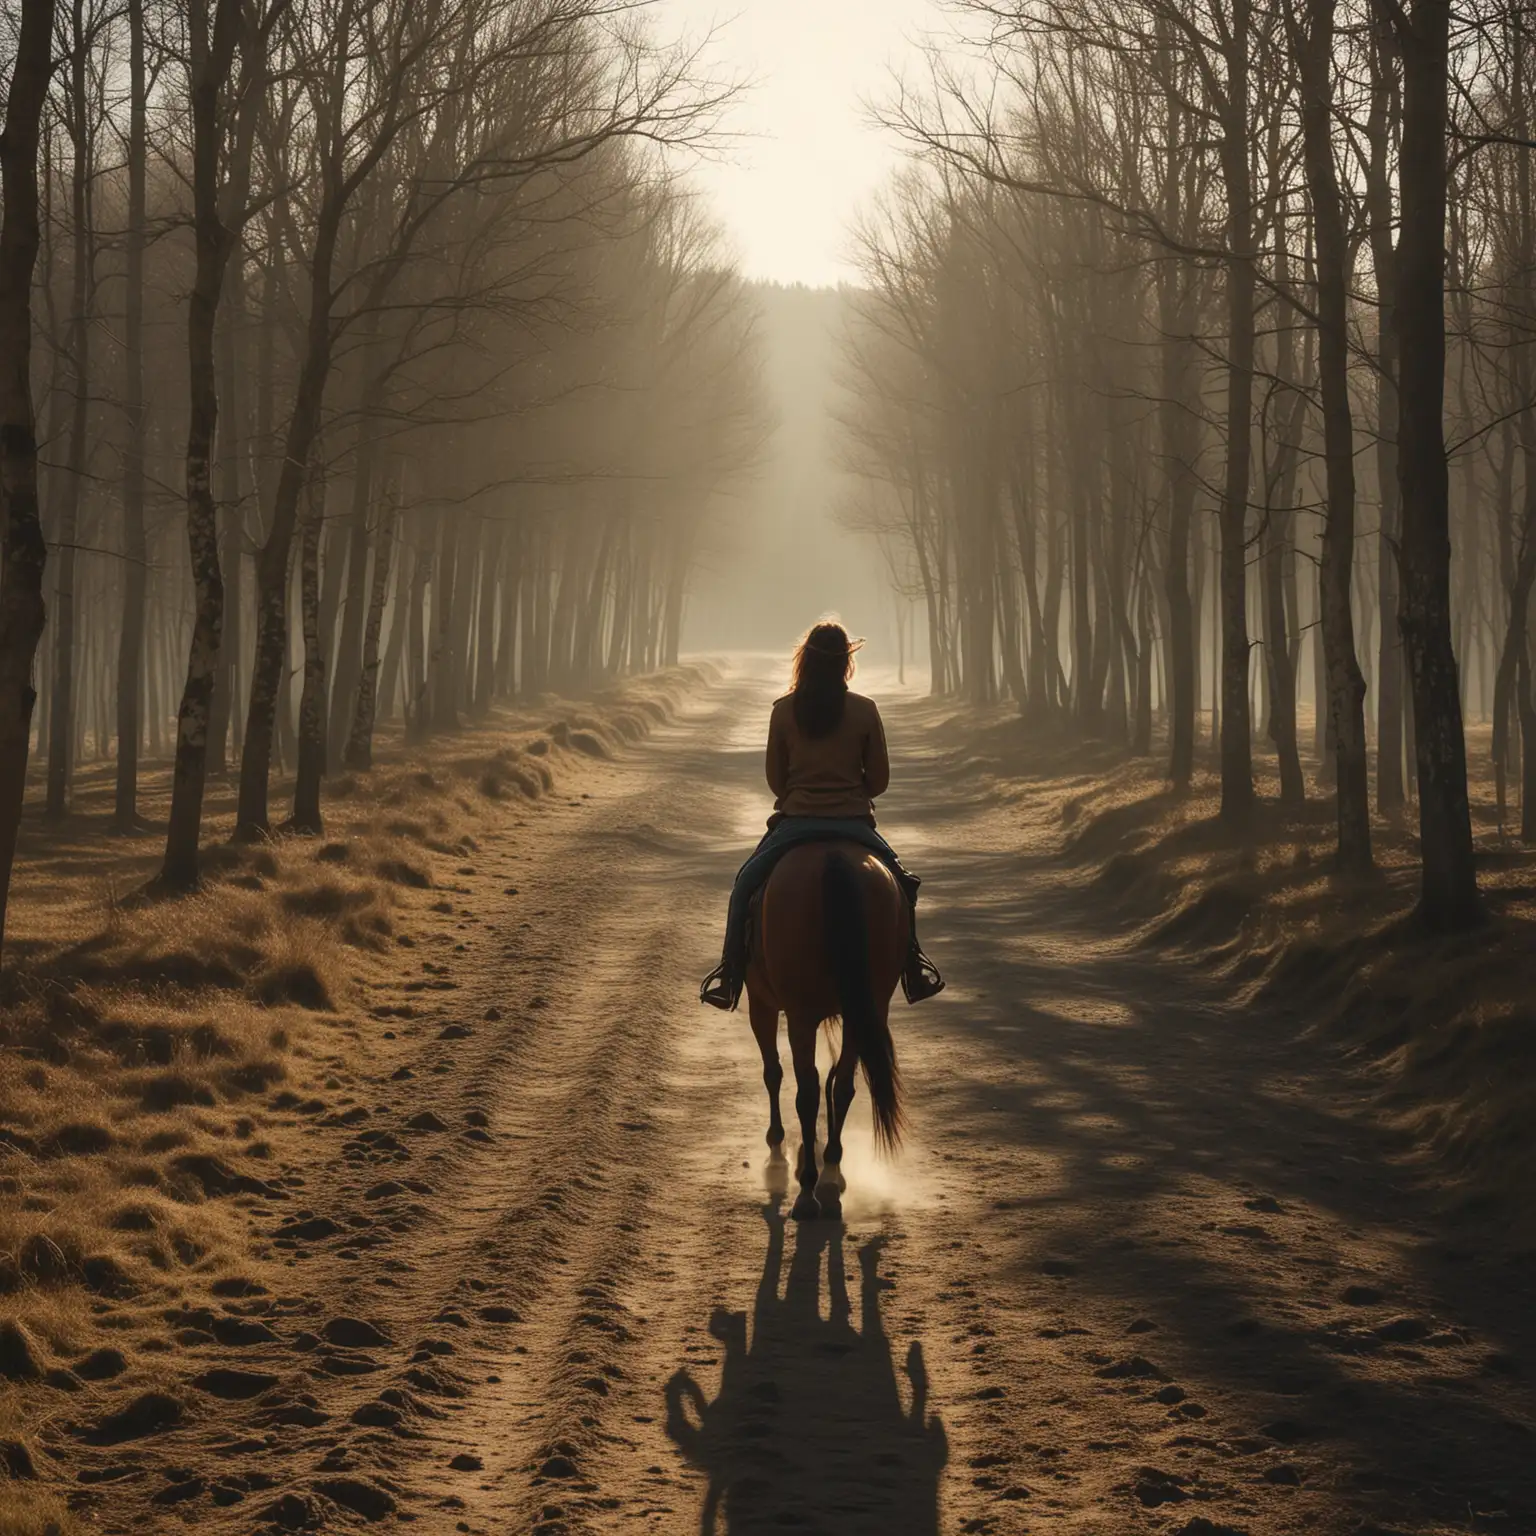 Solitary Woman Riding Horse into the Sunset in Cinematic Wooded Landscape